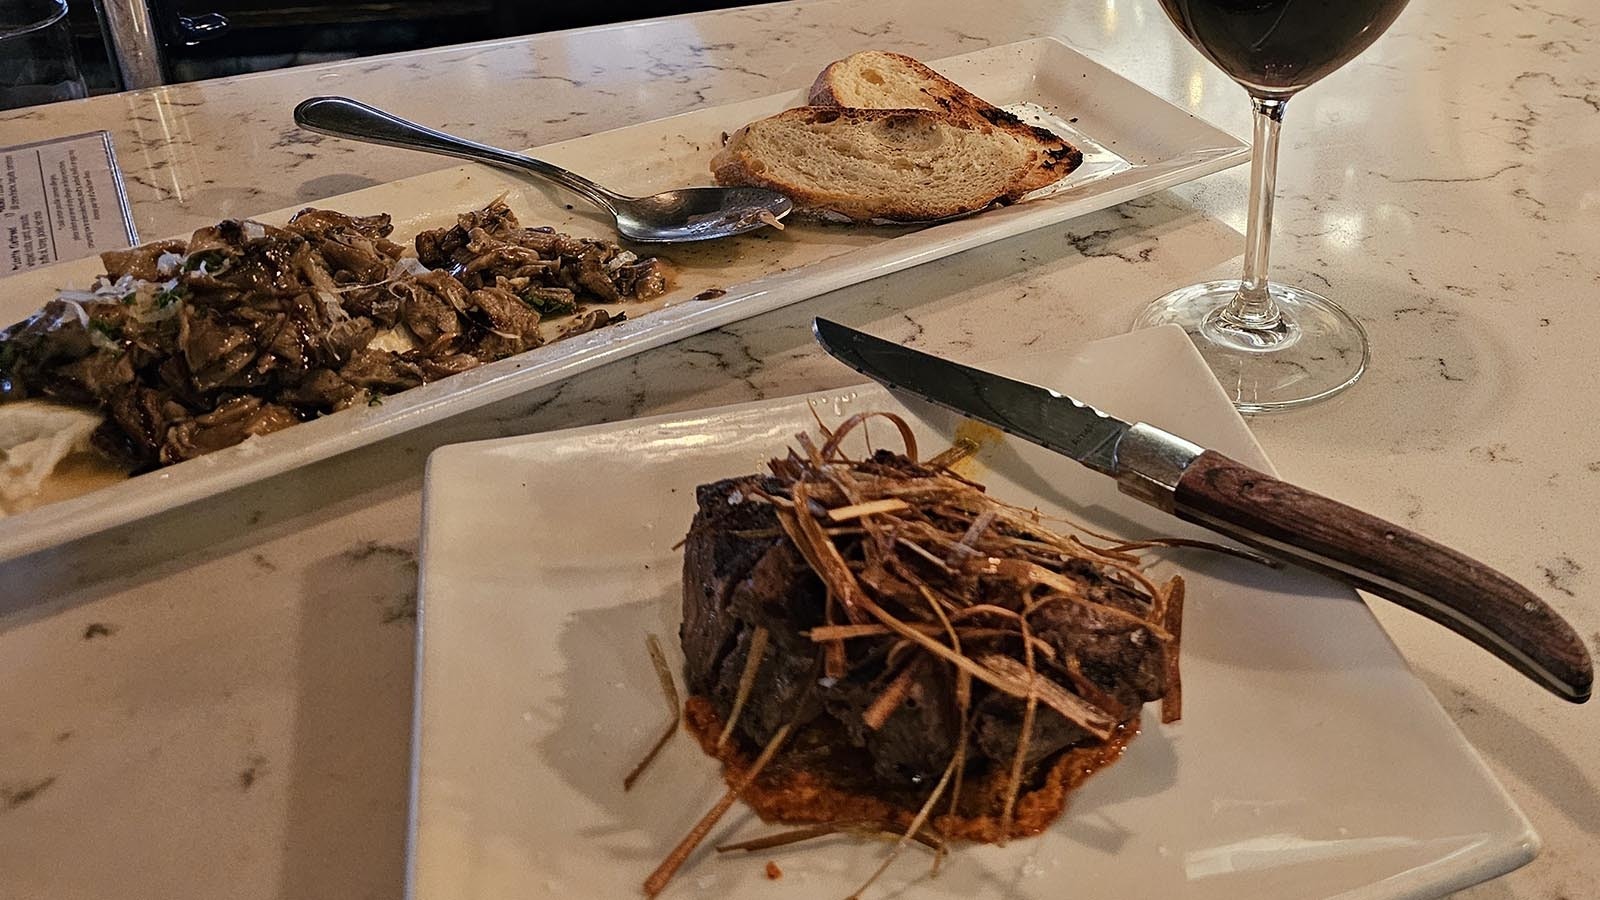 The steak is a more substantial small plate and paired well with the mushroom caprese salad. The dark red recommended by the staff was the perfect wine for the dishes.